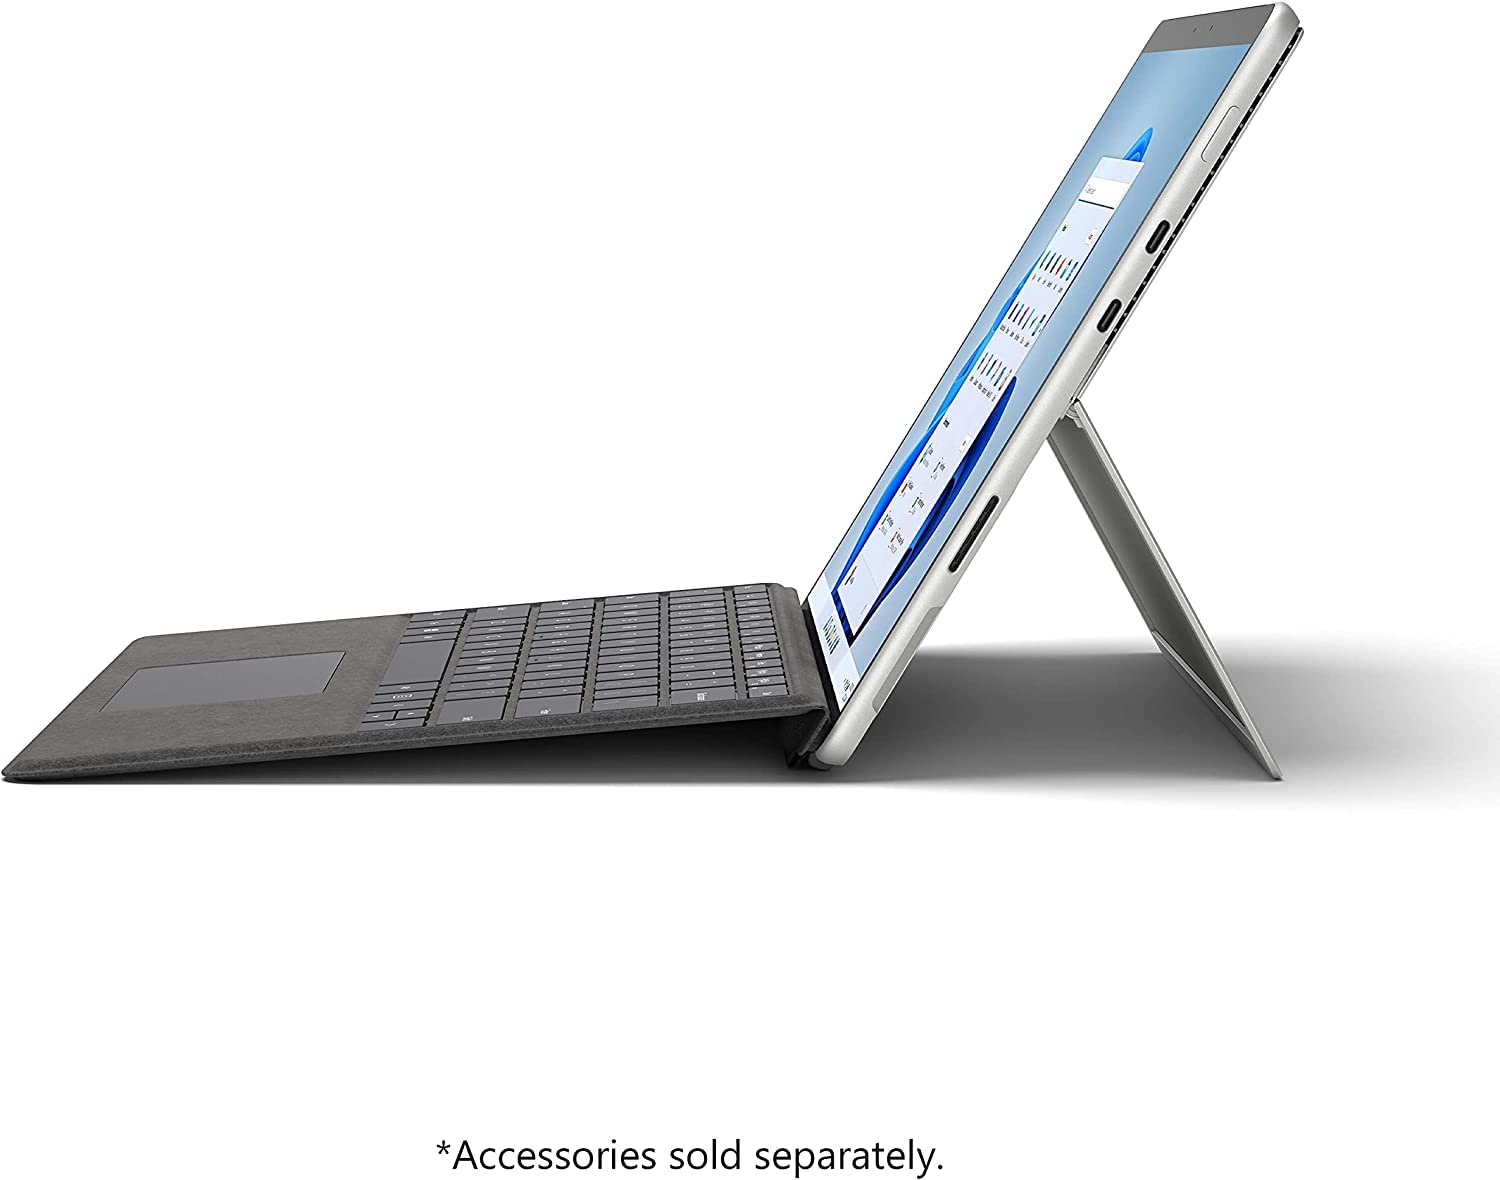 Microsoft Surface Pro 8 Tablet, 13